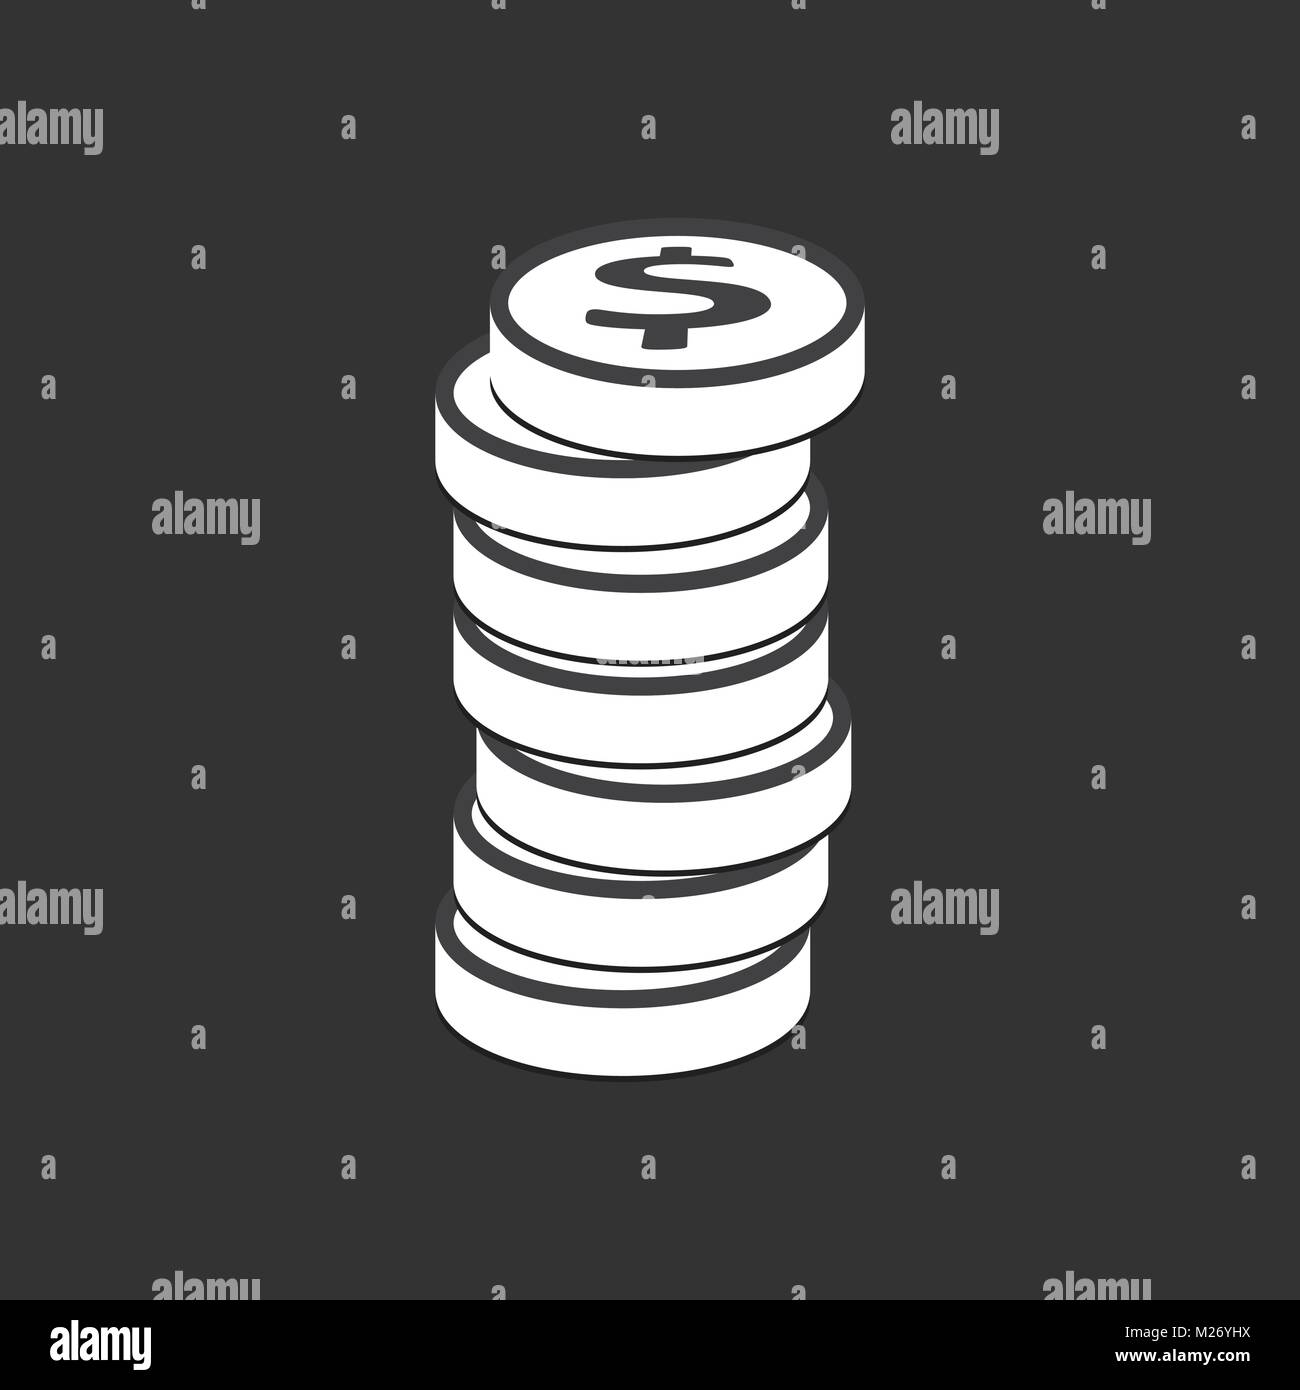 Money silhouette icon on black background. Coins vector illustration in flat style. Icons for design, website. Stock Vector